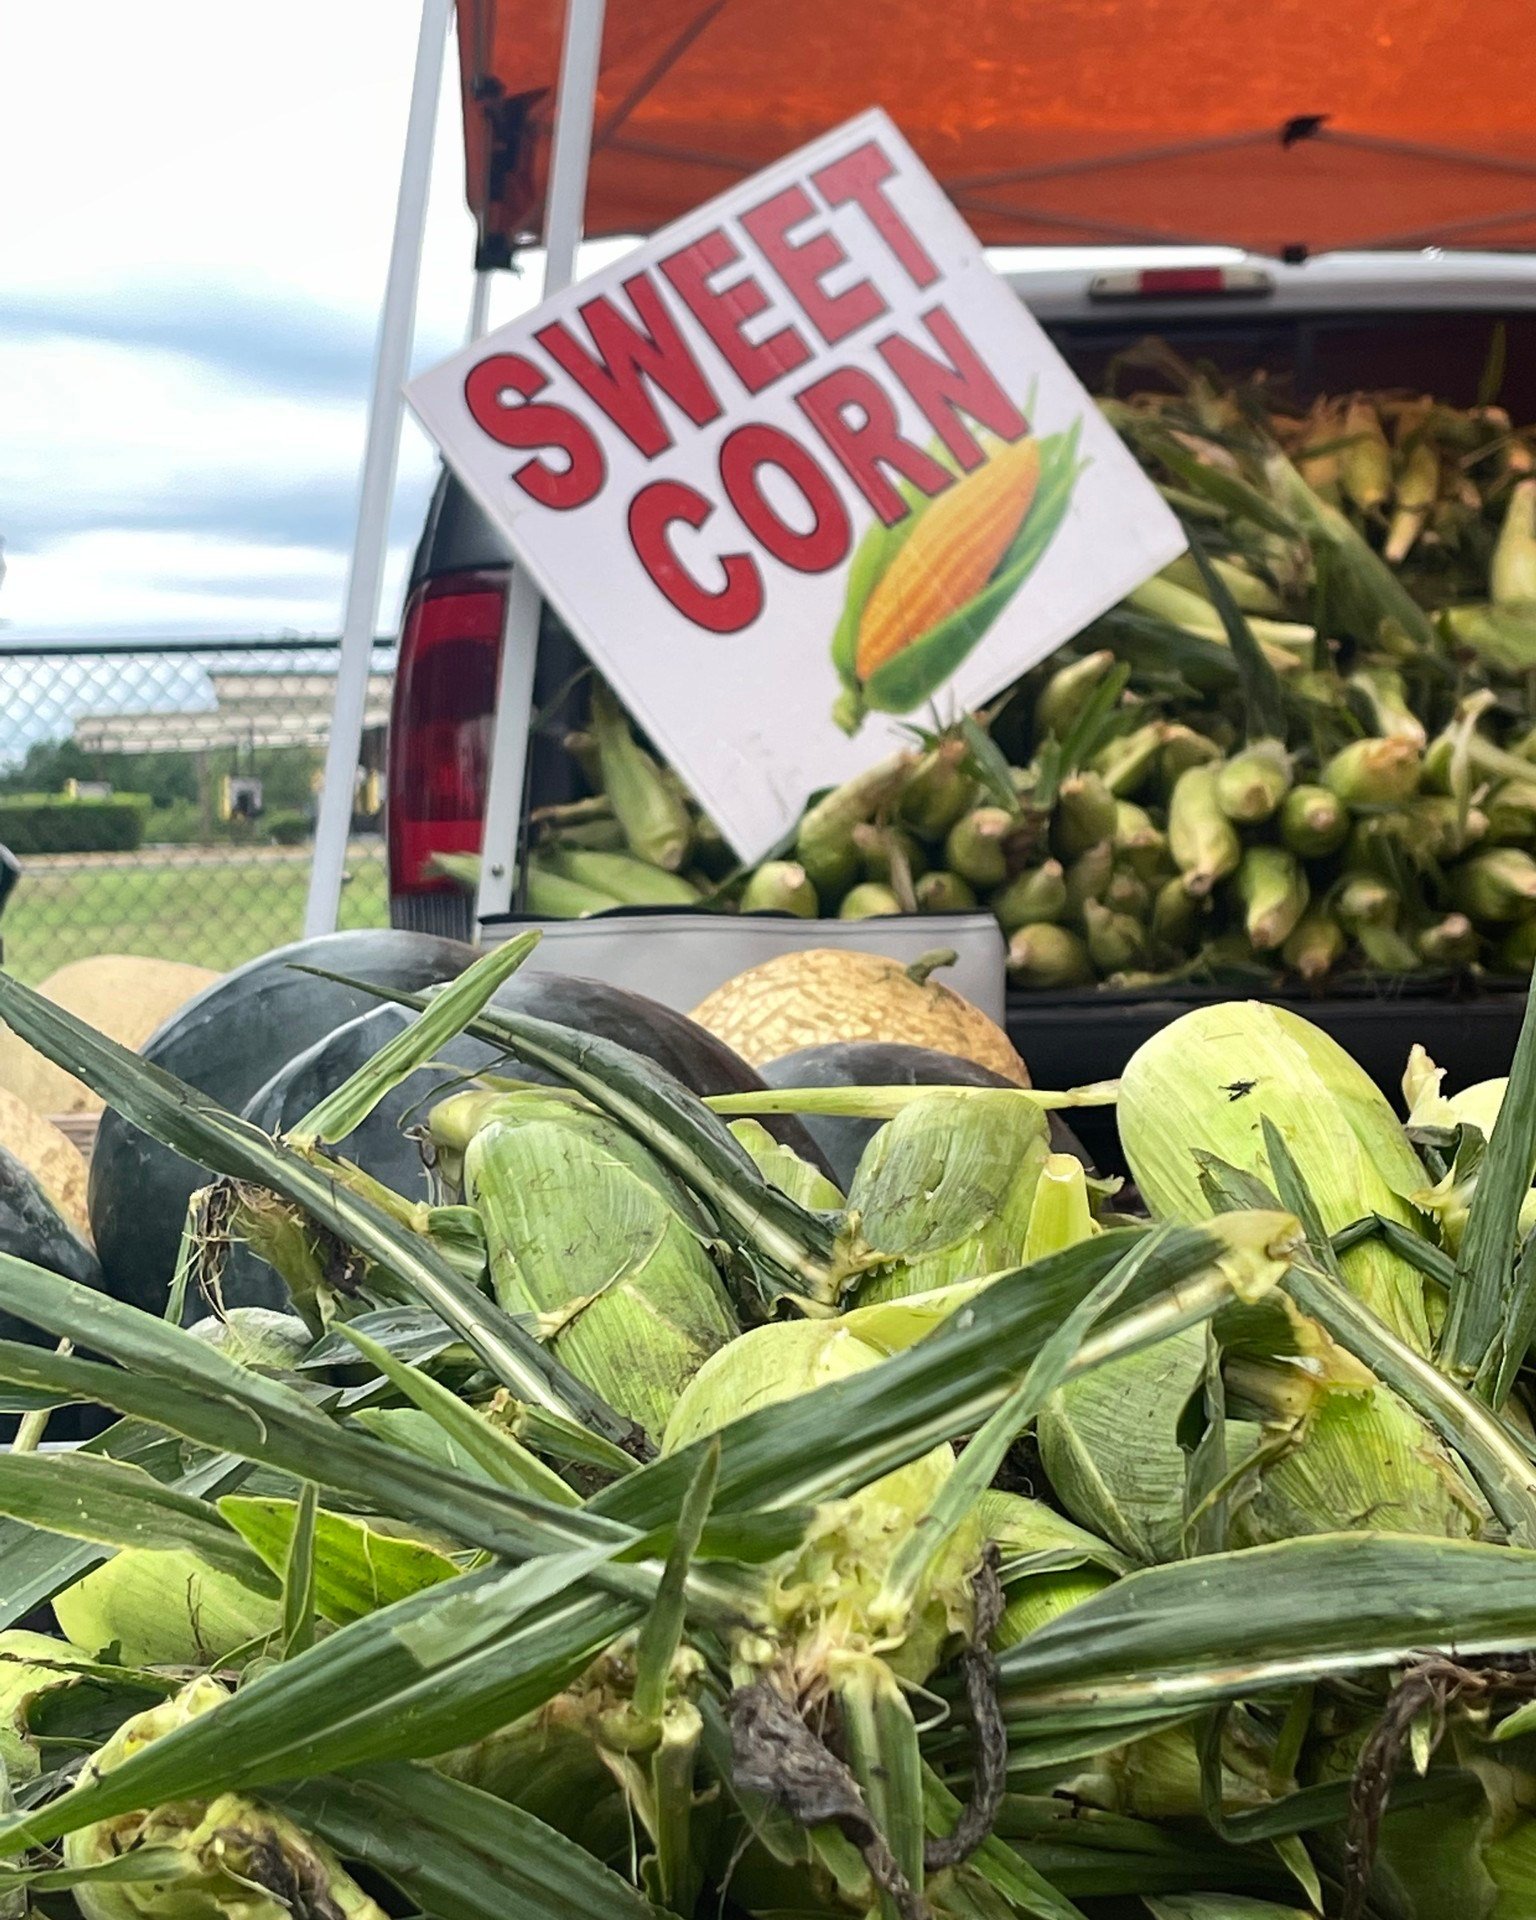 🌽 Corn you believe it's almost May? Our summer market starts in just a few days! Don't miss out on all the delicious in-season produce and local goods. #SupportLocal #SummerMarket